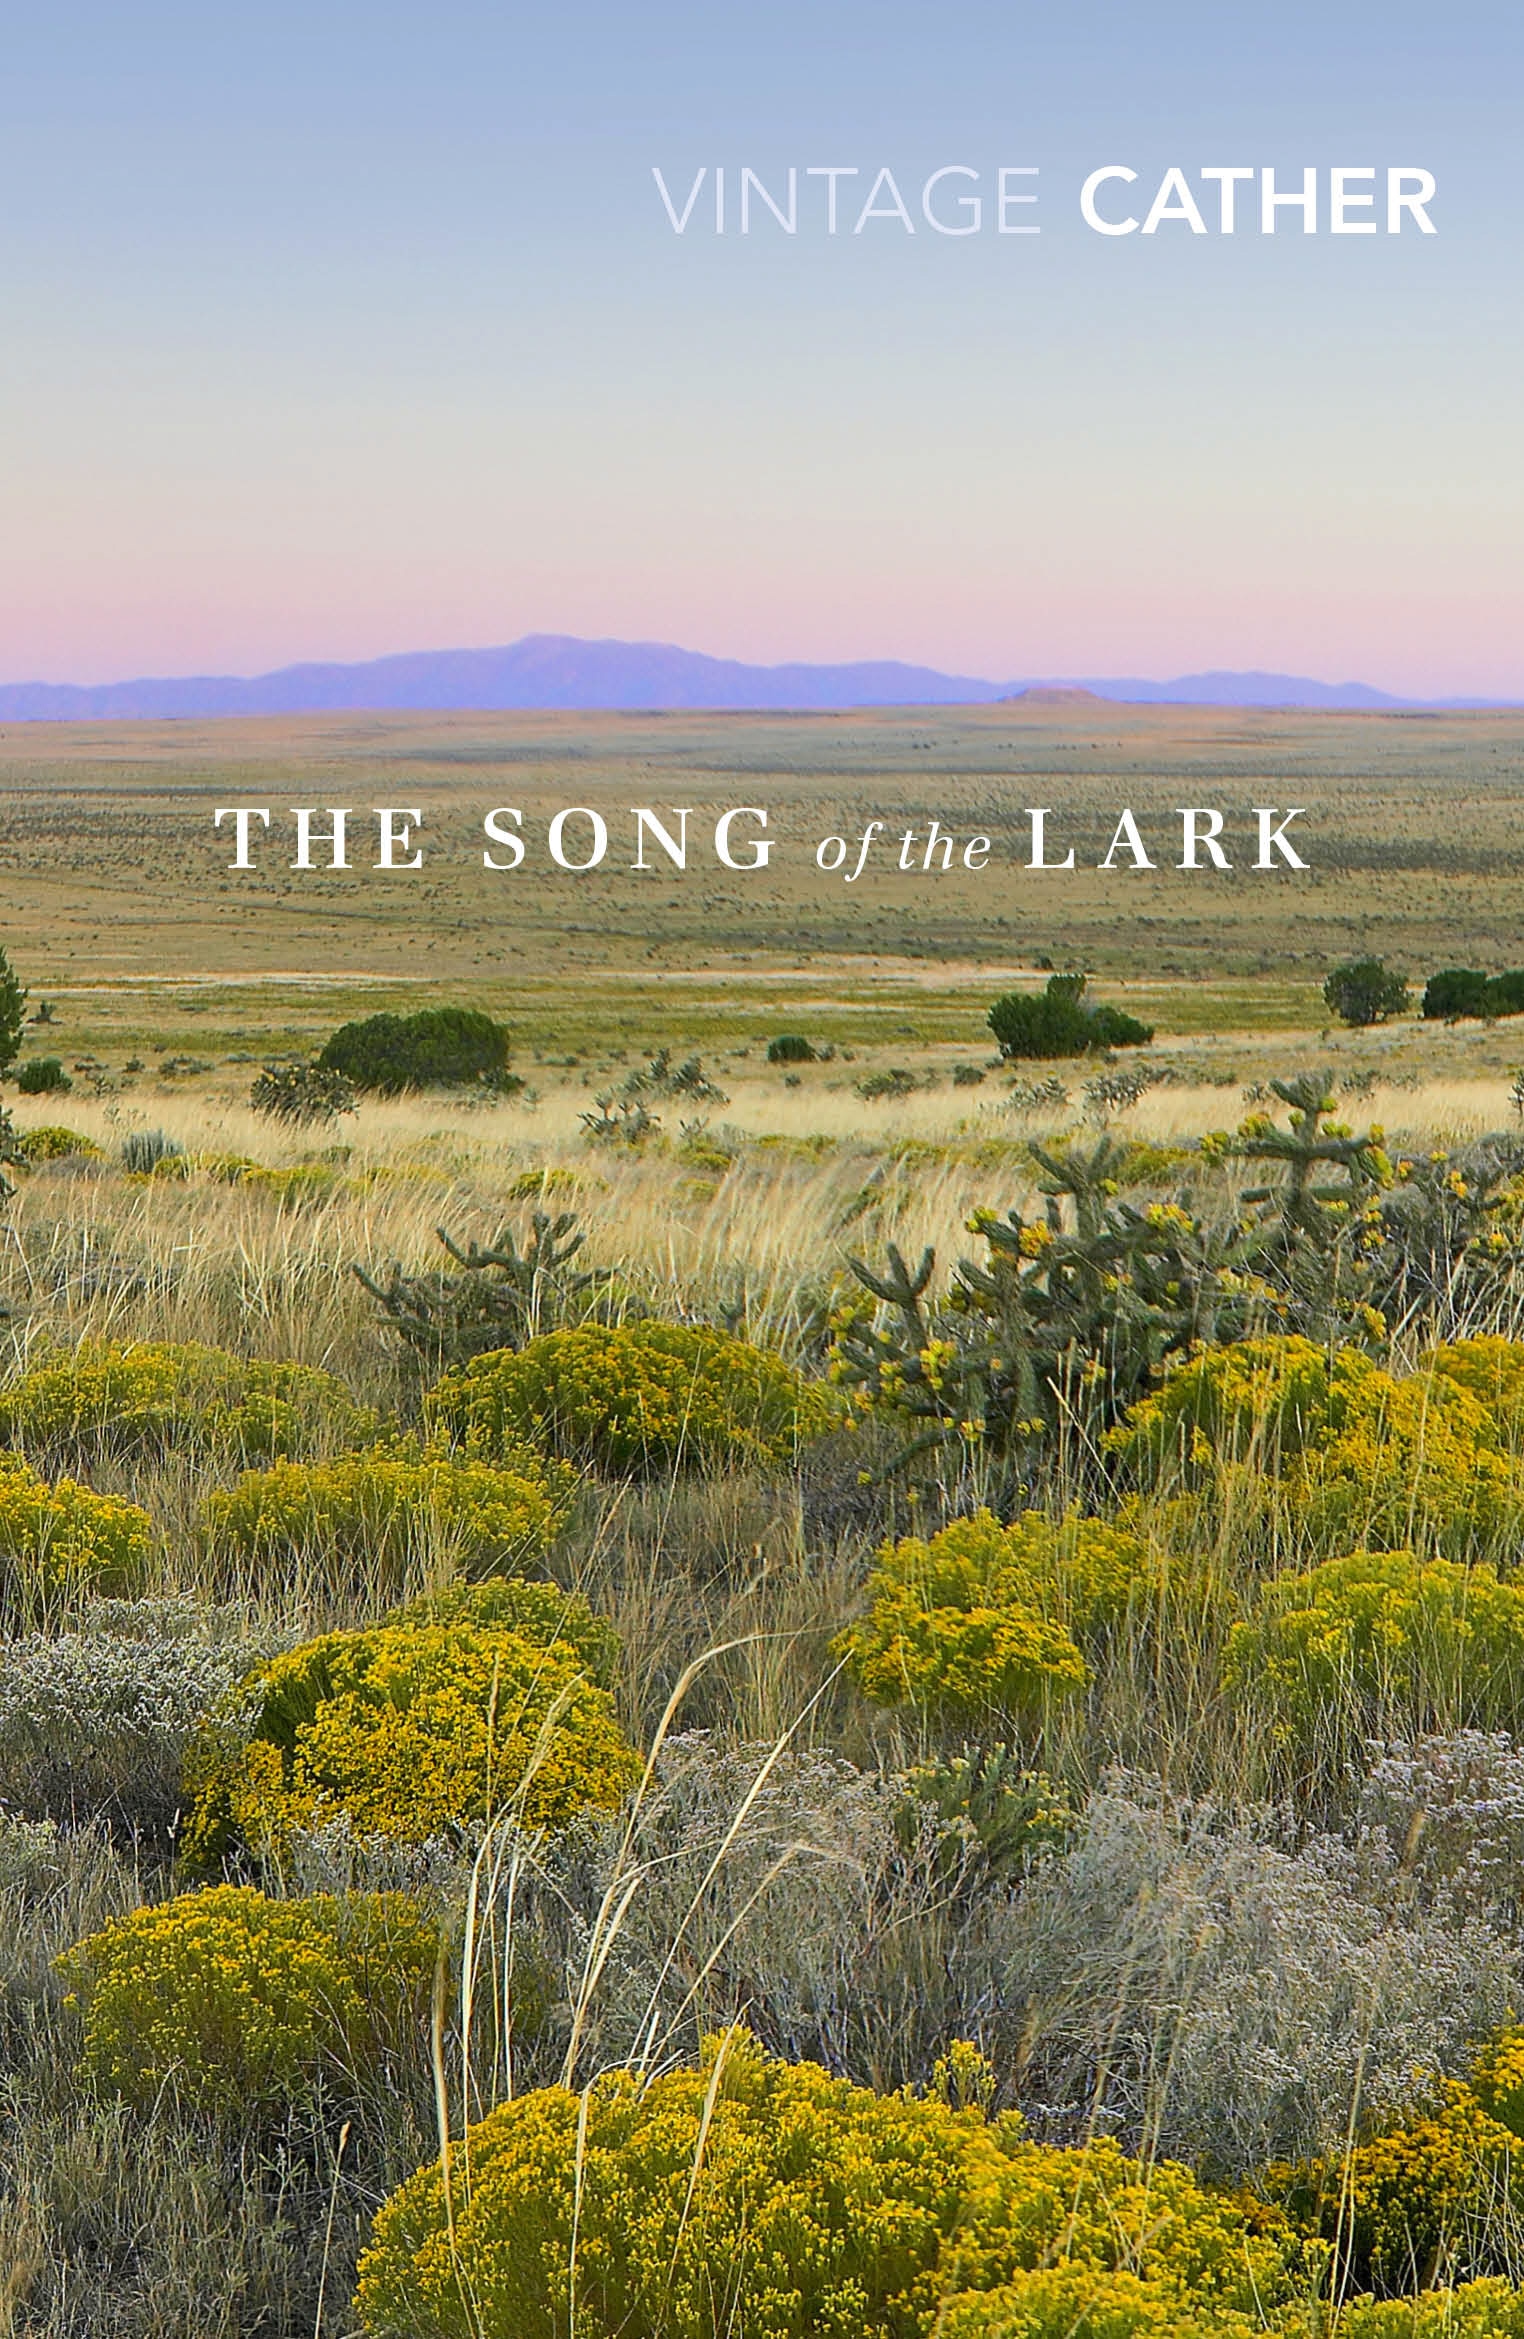 Book “The Song of the Lark” by Willa Cather, Penelope Lively — September 5, 2019